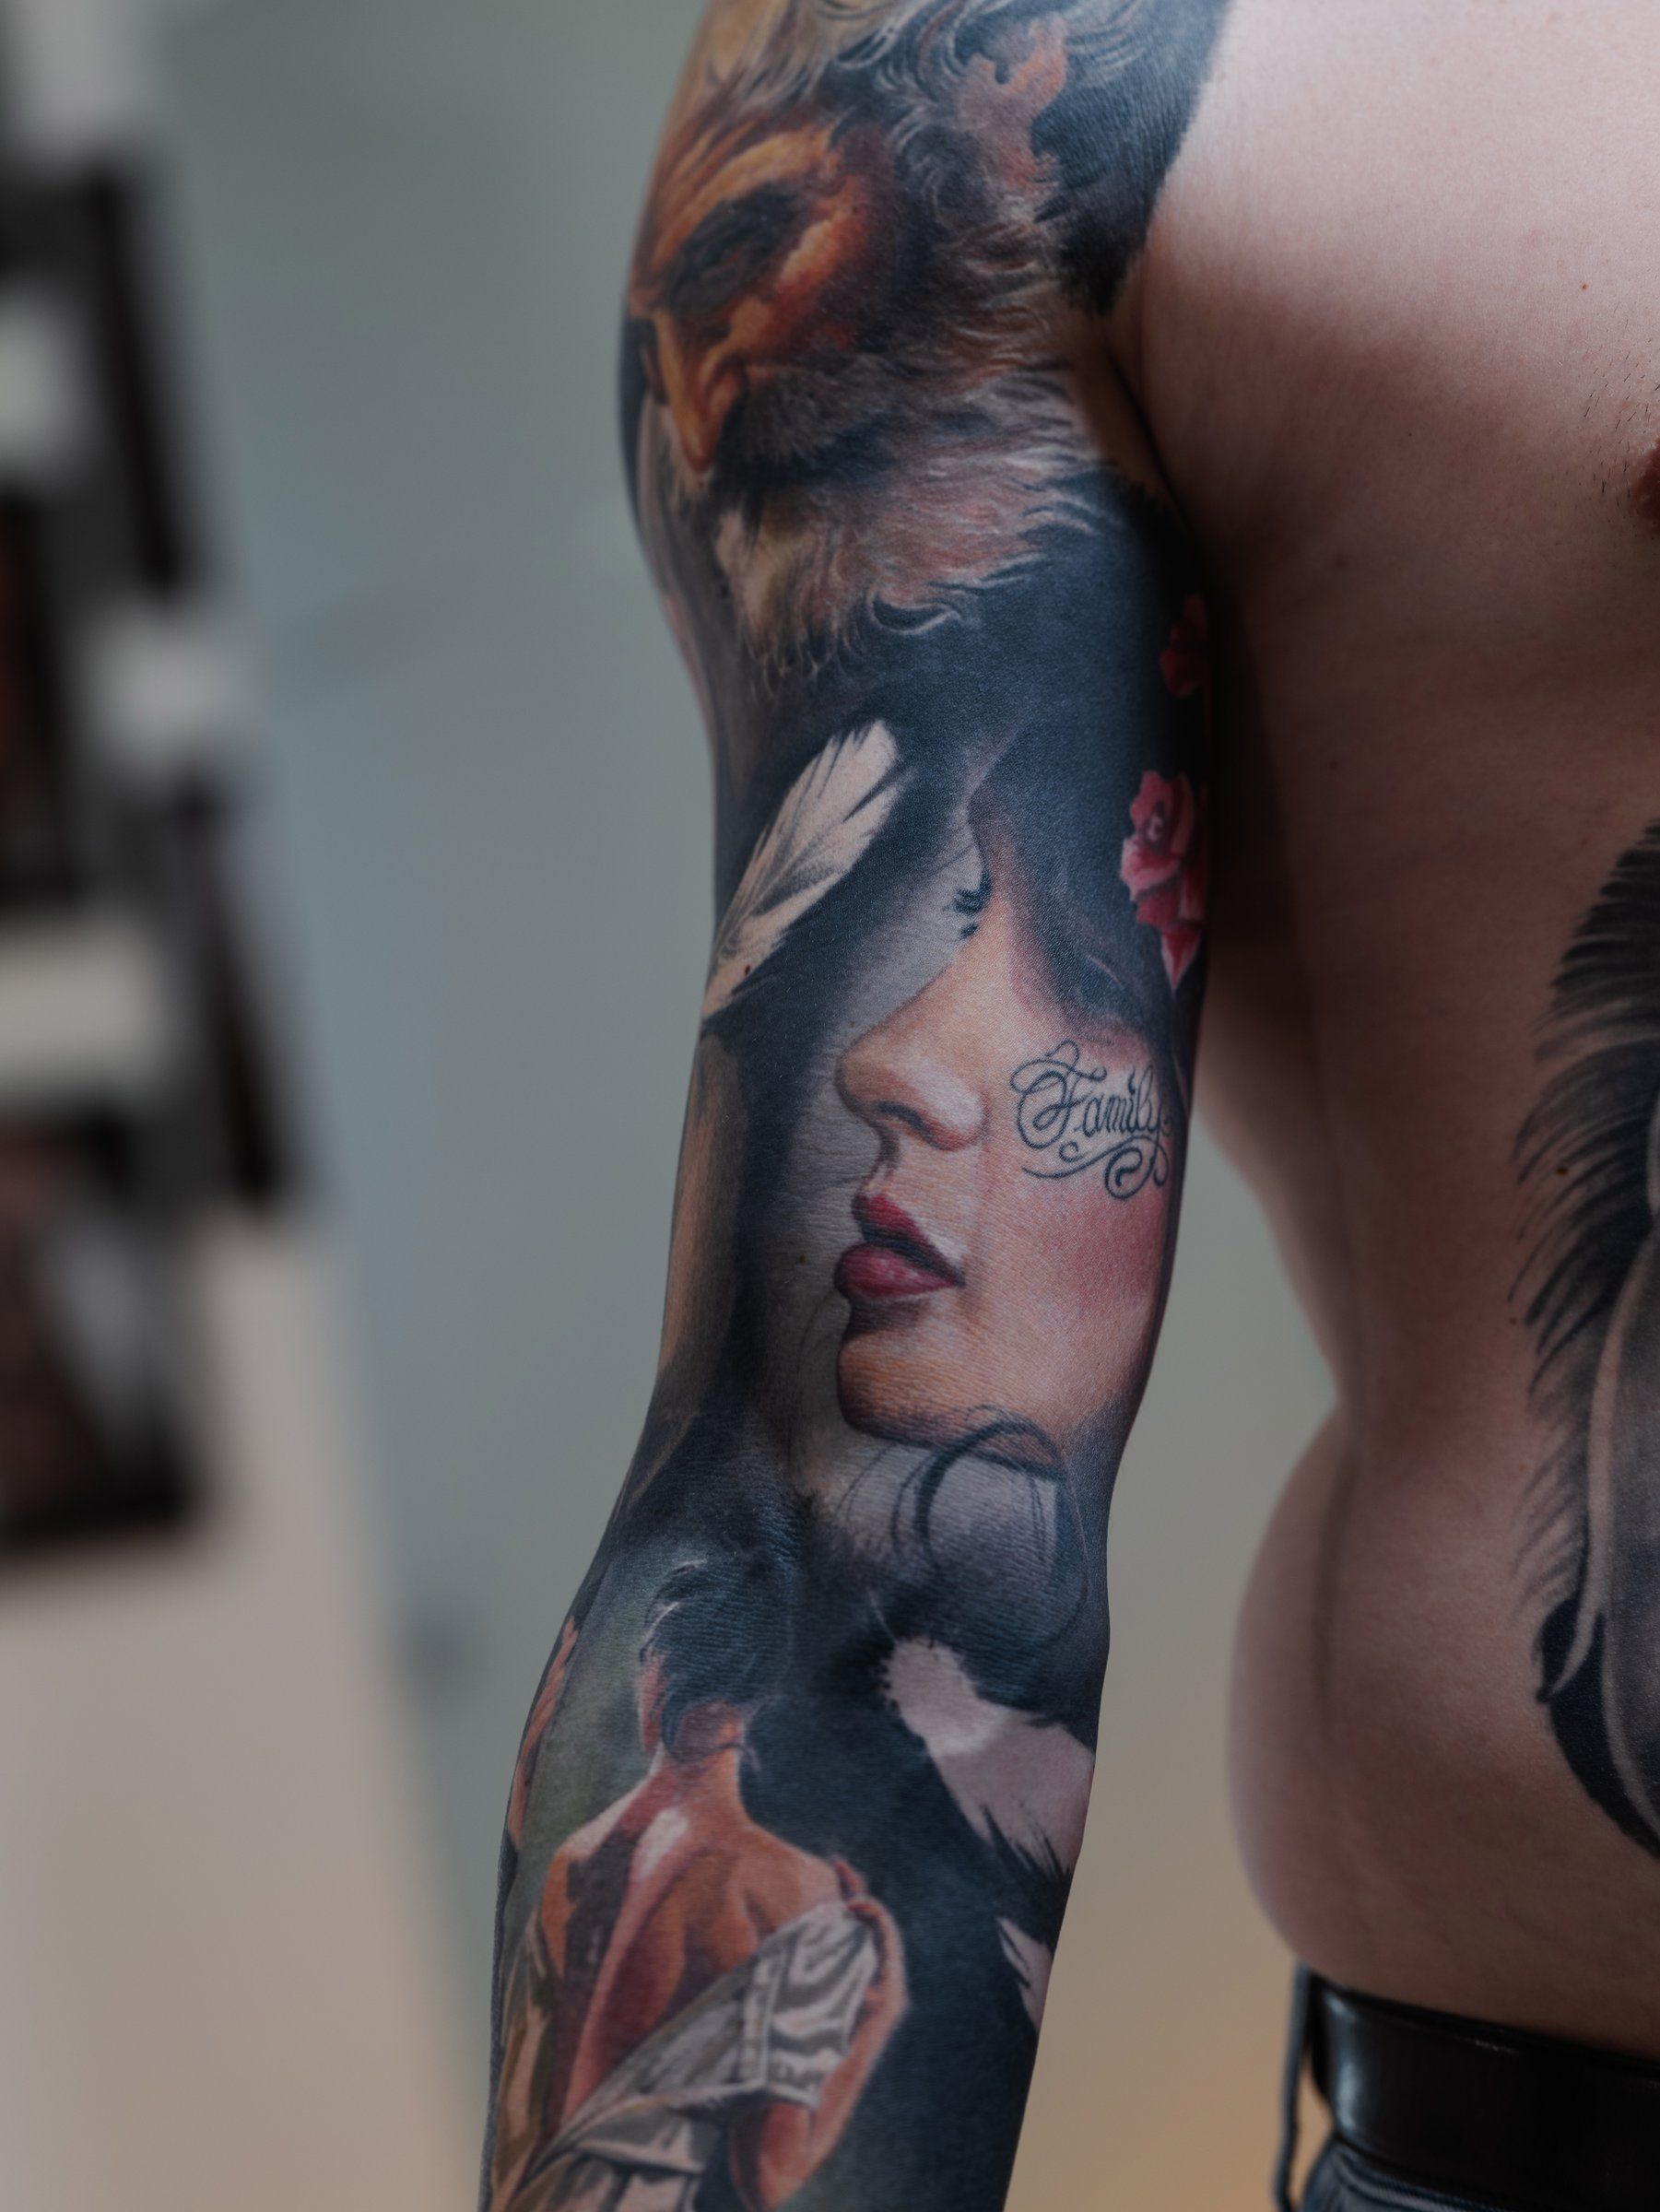 The Vikings are Back, Thanks to These Danish Tattoo Artists | Ratta Tattoo